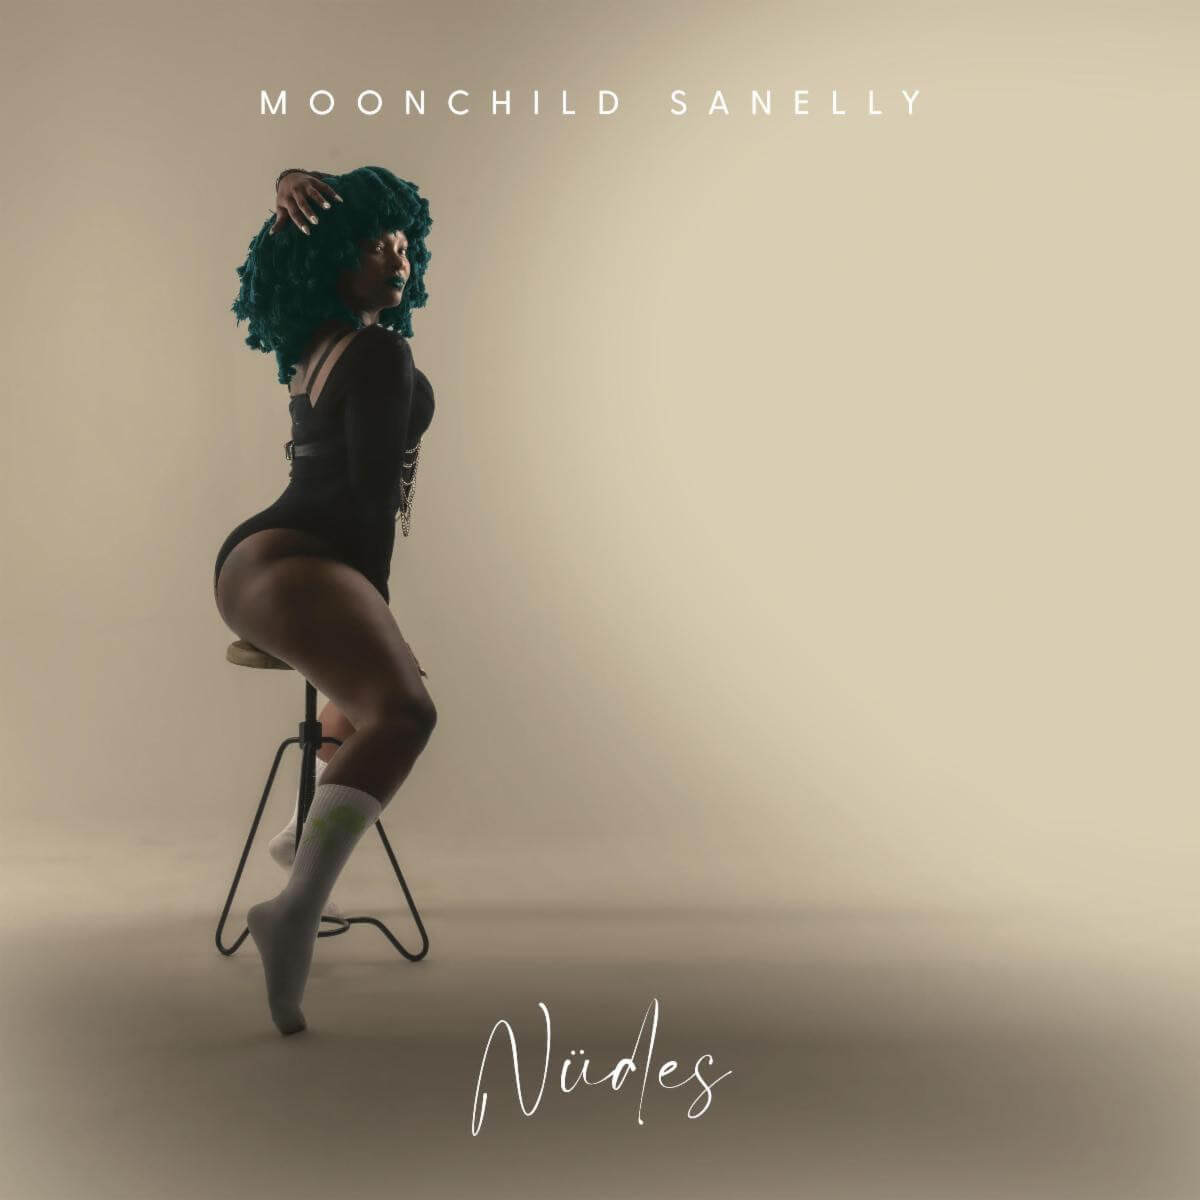 Moonchild Sanelly, South Africa's "Queen of Gqom," has dropped her new EP Nüdes, now available via Transgressive Records (Arlo Parks)